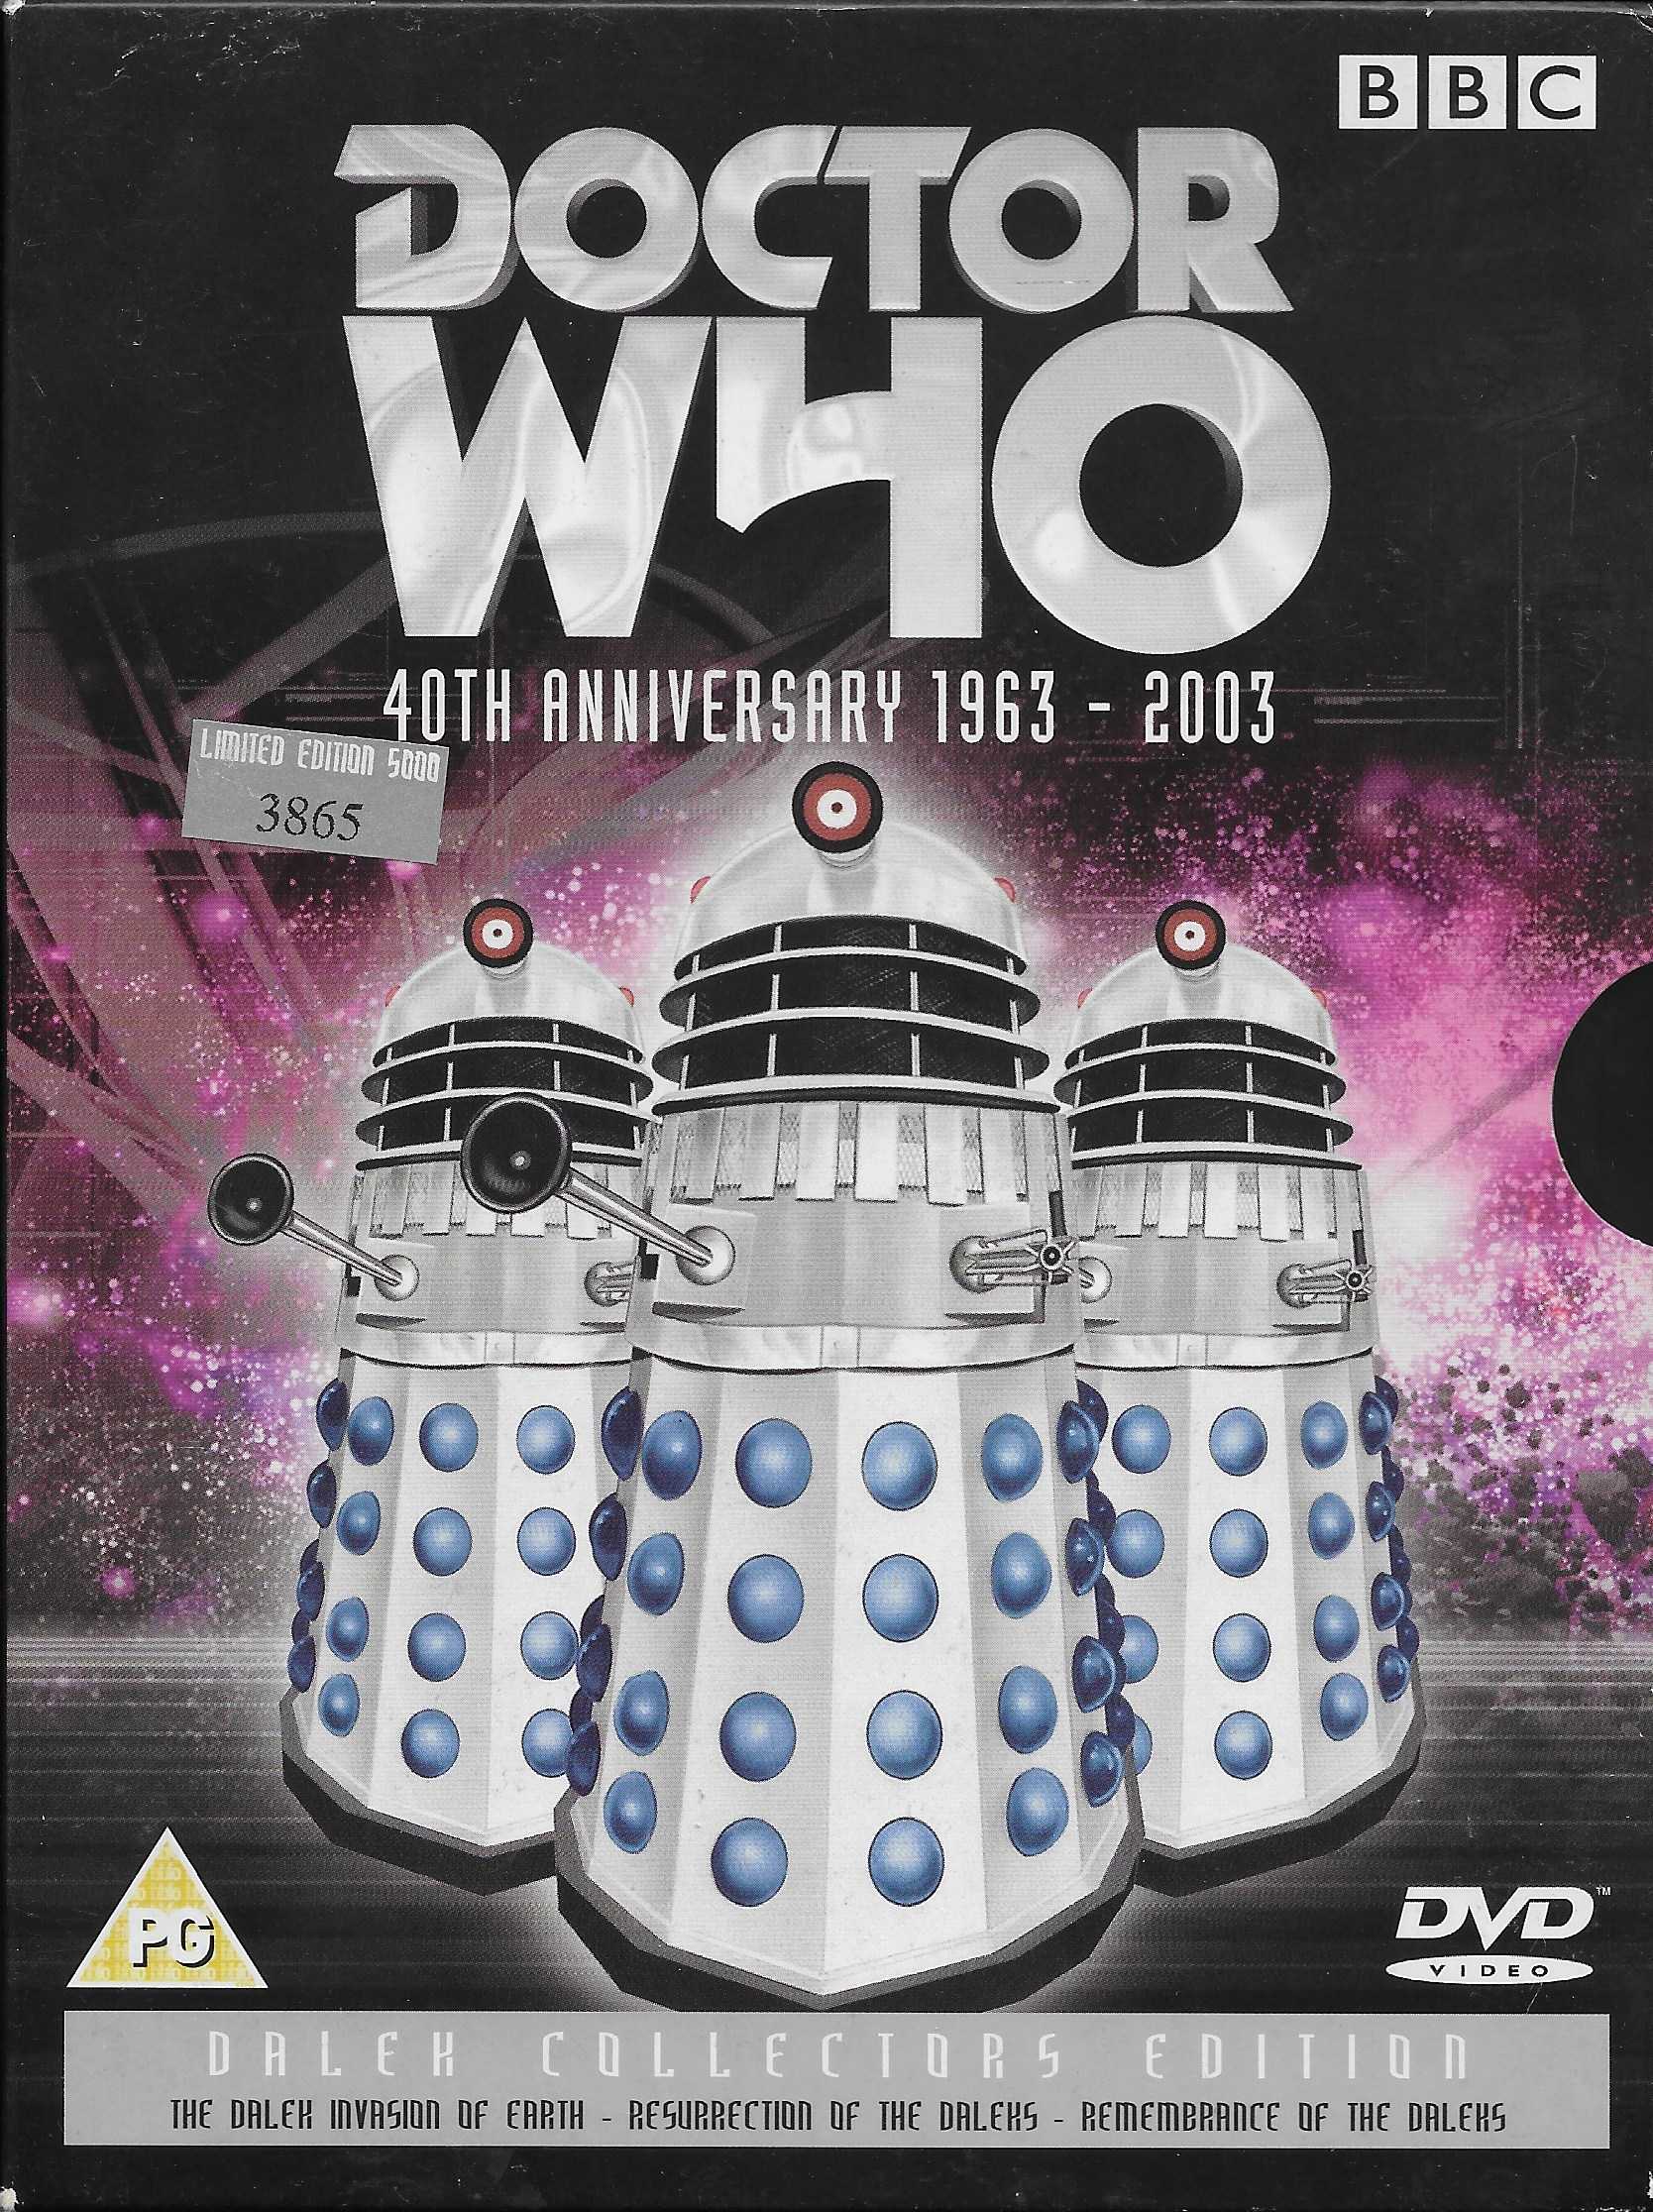 Picture of BBCDVD 1384 Doctor Who - Dalek collectors edition by artist Terry Nation / Eric Saward / Ben Aaronovitch from the BBC records and Tapes library